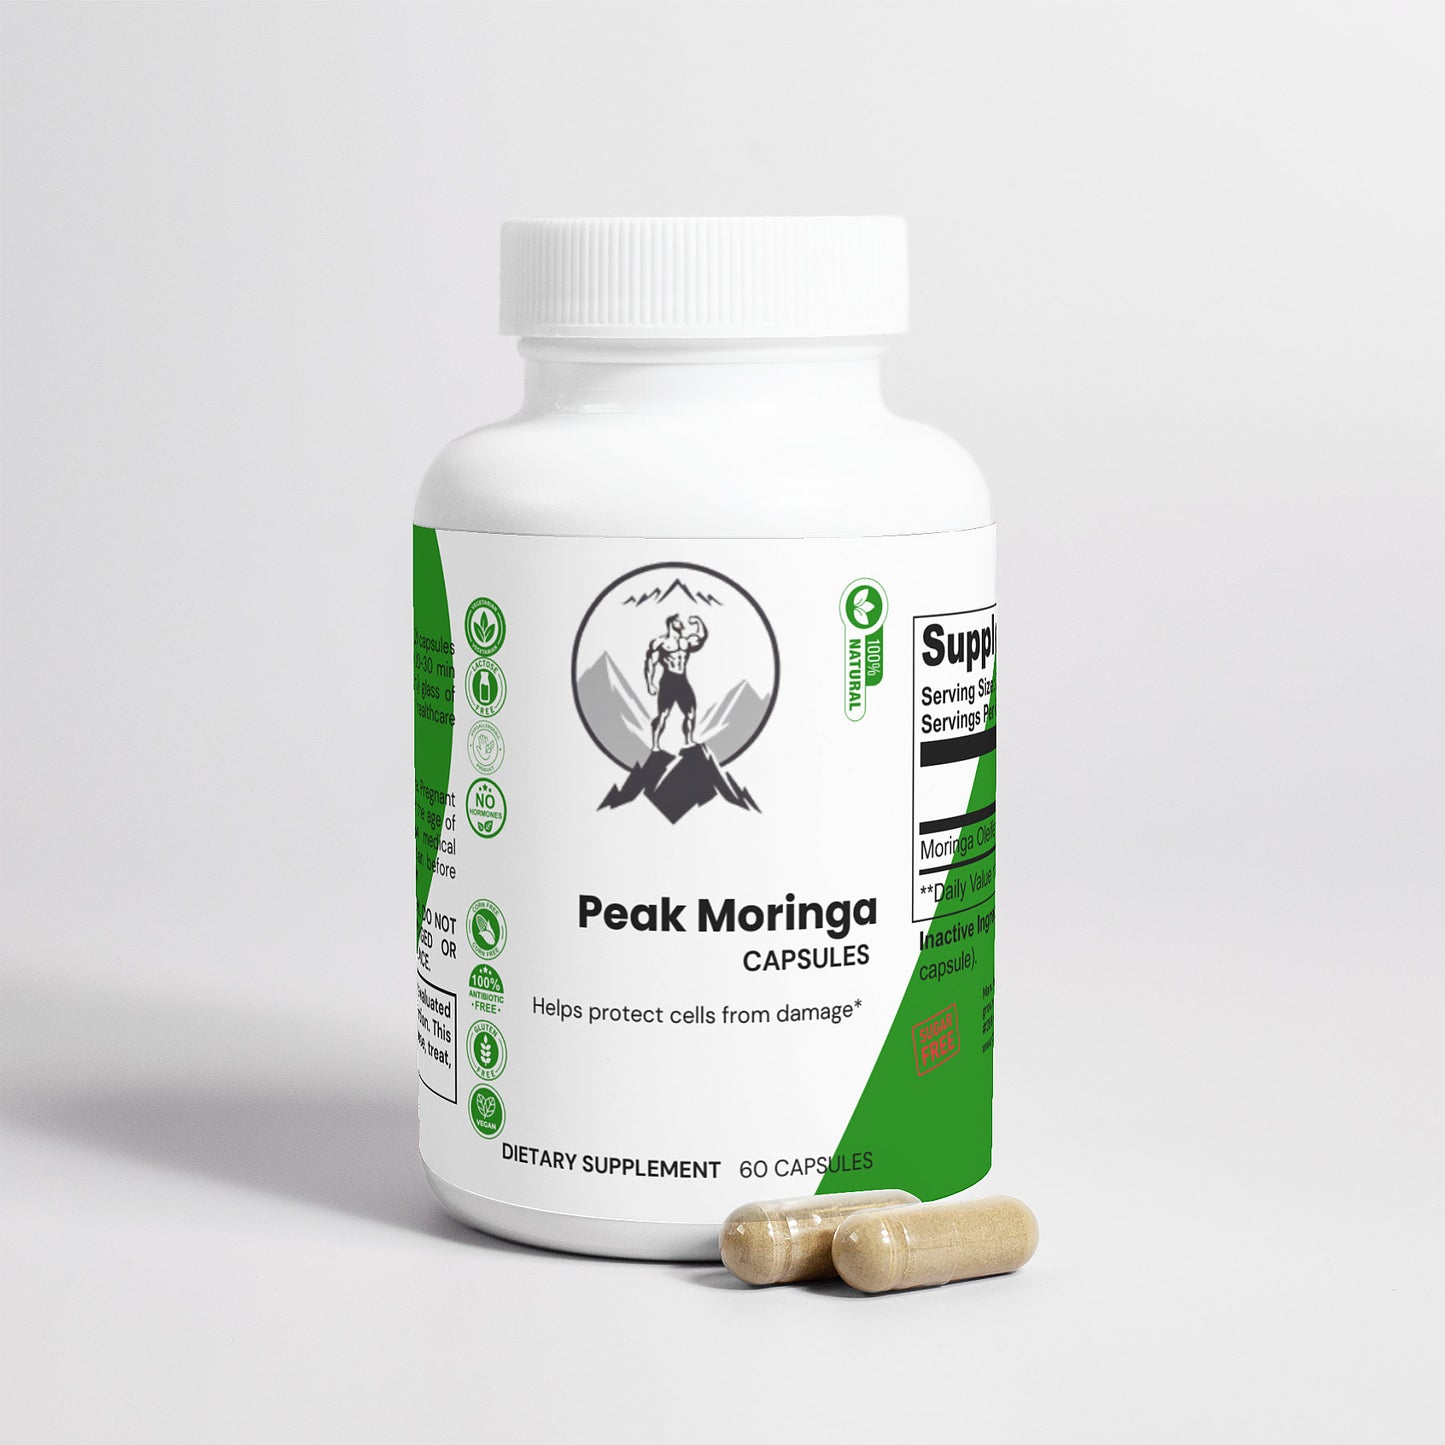 Peak MoringaNatural ExtractsMoringa Oleifera is a tree that originates from Northern India and has been praised for its health benefits for centuries. It’s most famous for its impressive nutritPeak MoringaThe Rocky Ranger